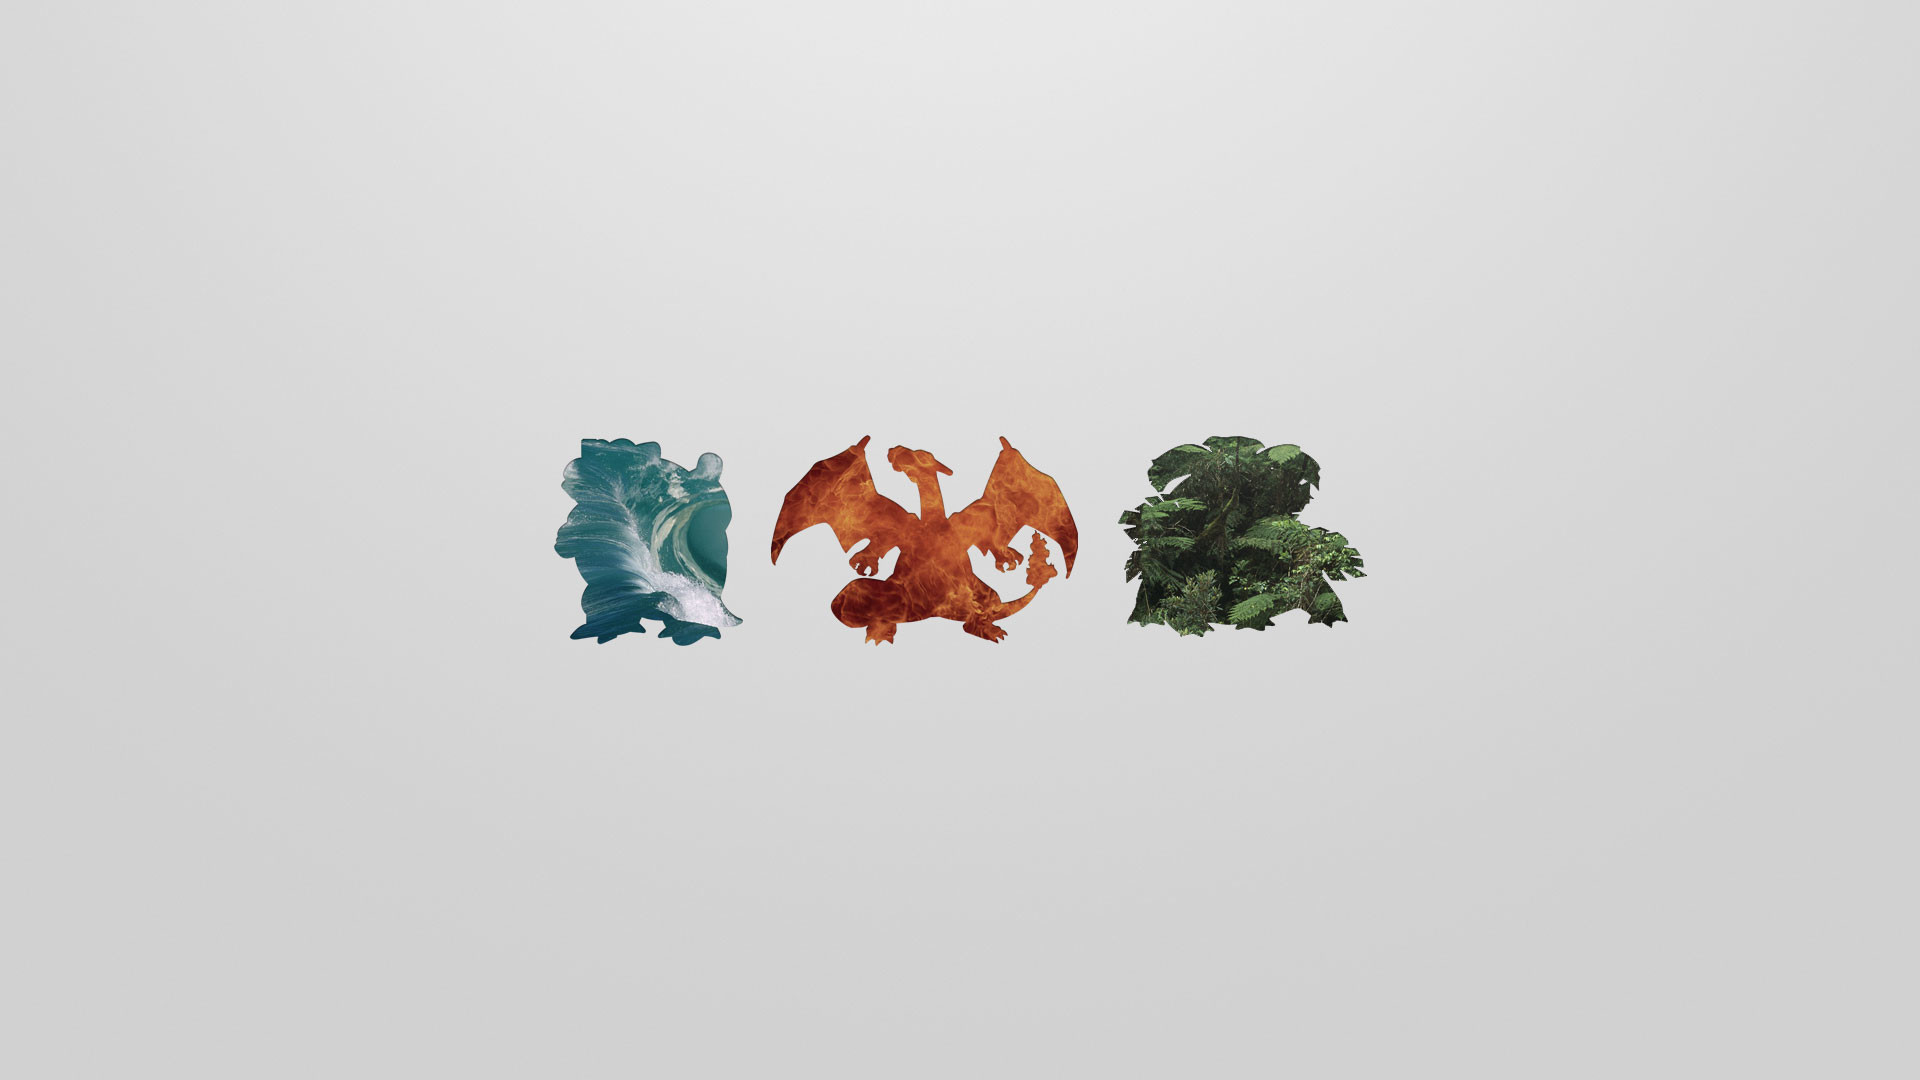 For those of you who liked the pokemon starters wallpaper, here are their evolved forms